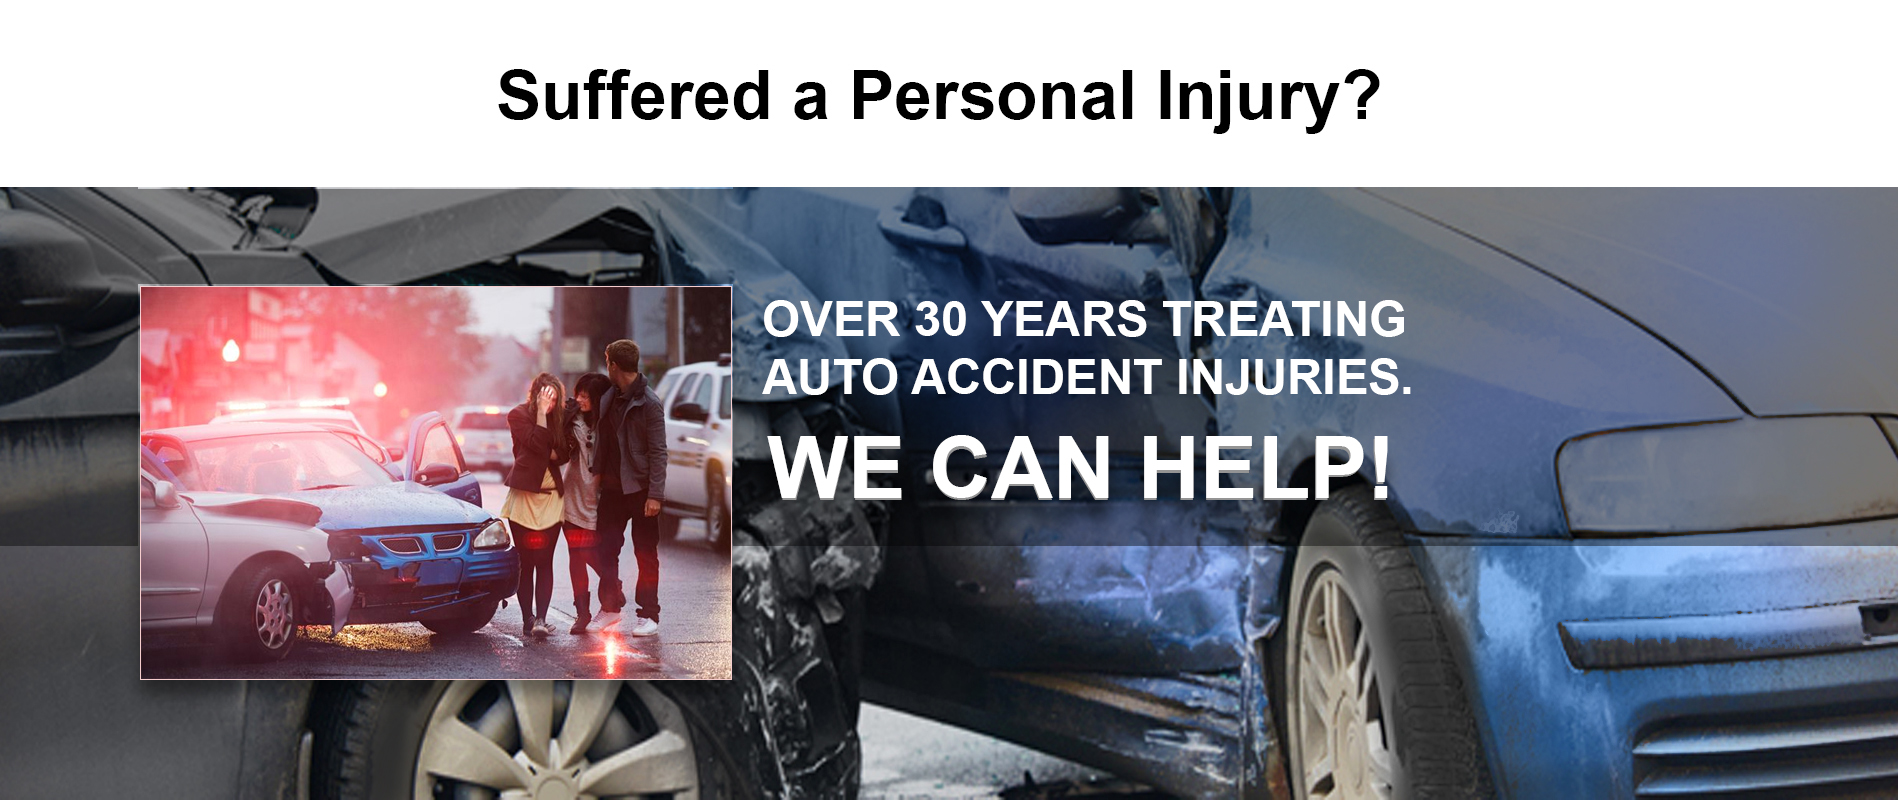 Suffered a personal injury?